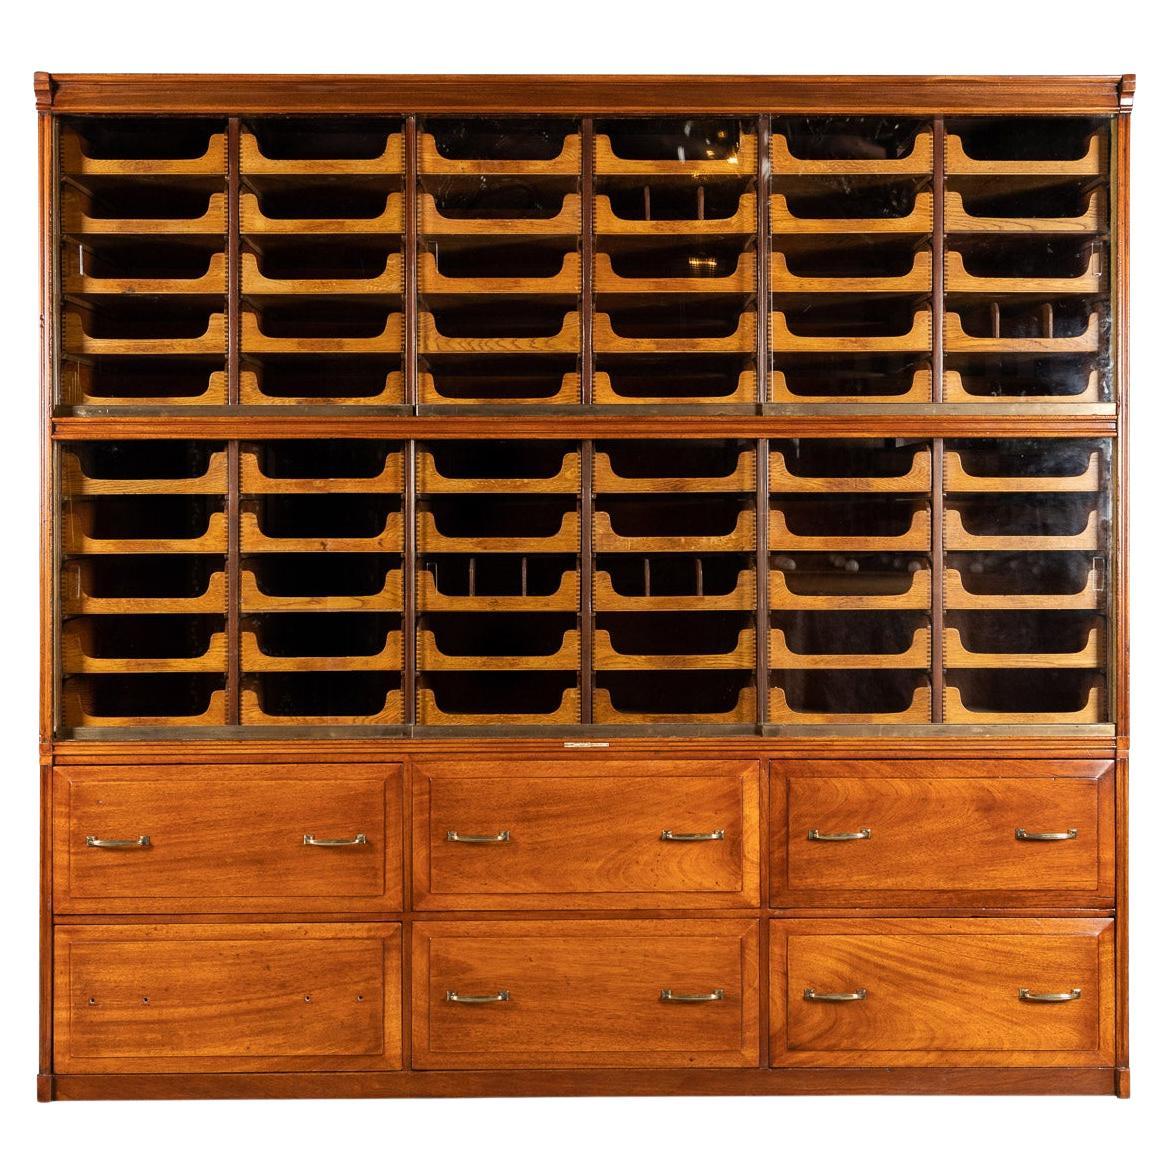 Antique early-20th century English hand crafted mahogany haberdashery, this piece has sixty small open drawers protected by sliding glass doors on ball baring bronze runners. It also has six deep drawers below with original brass fittings. Made by